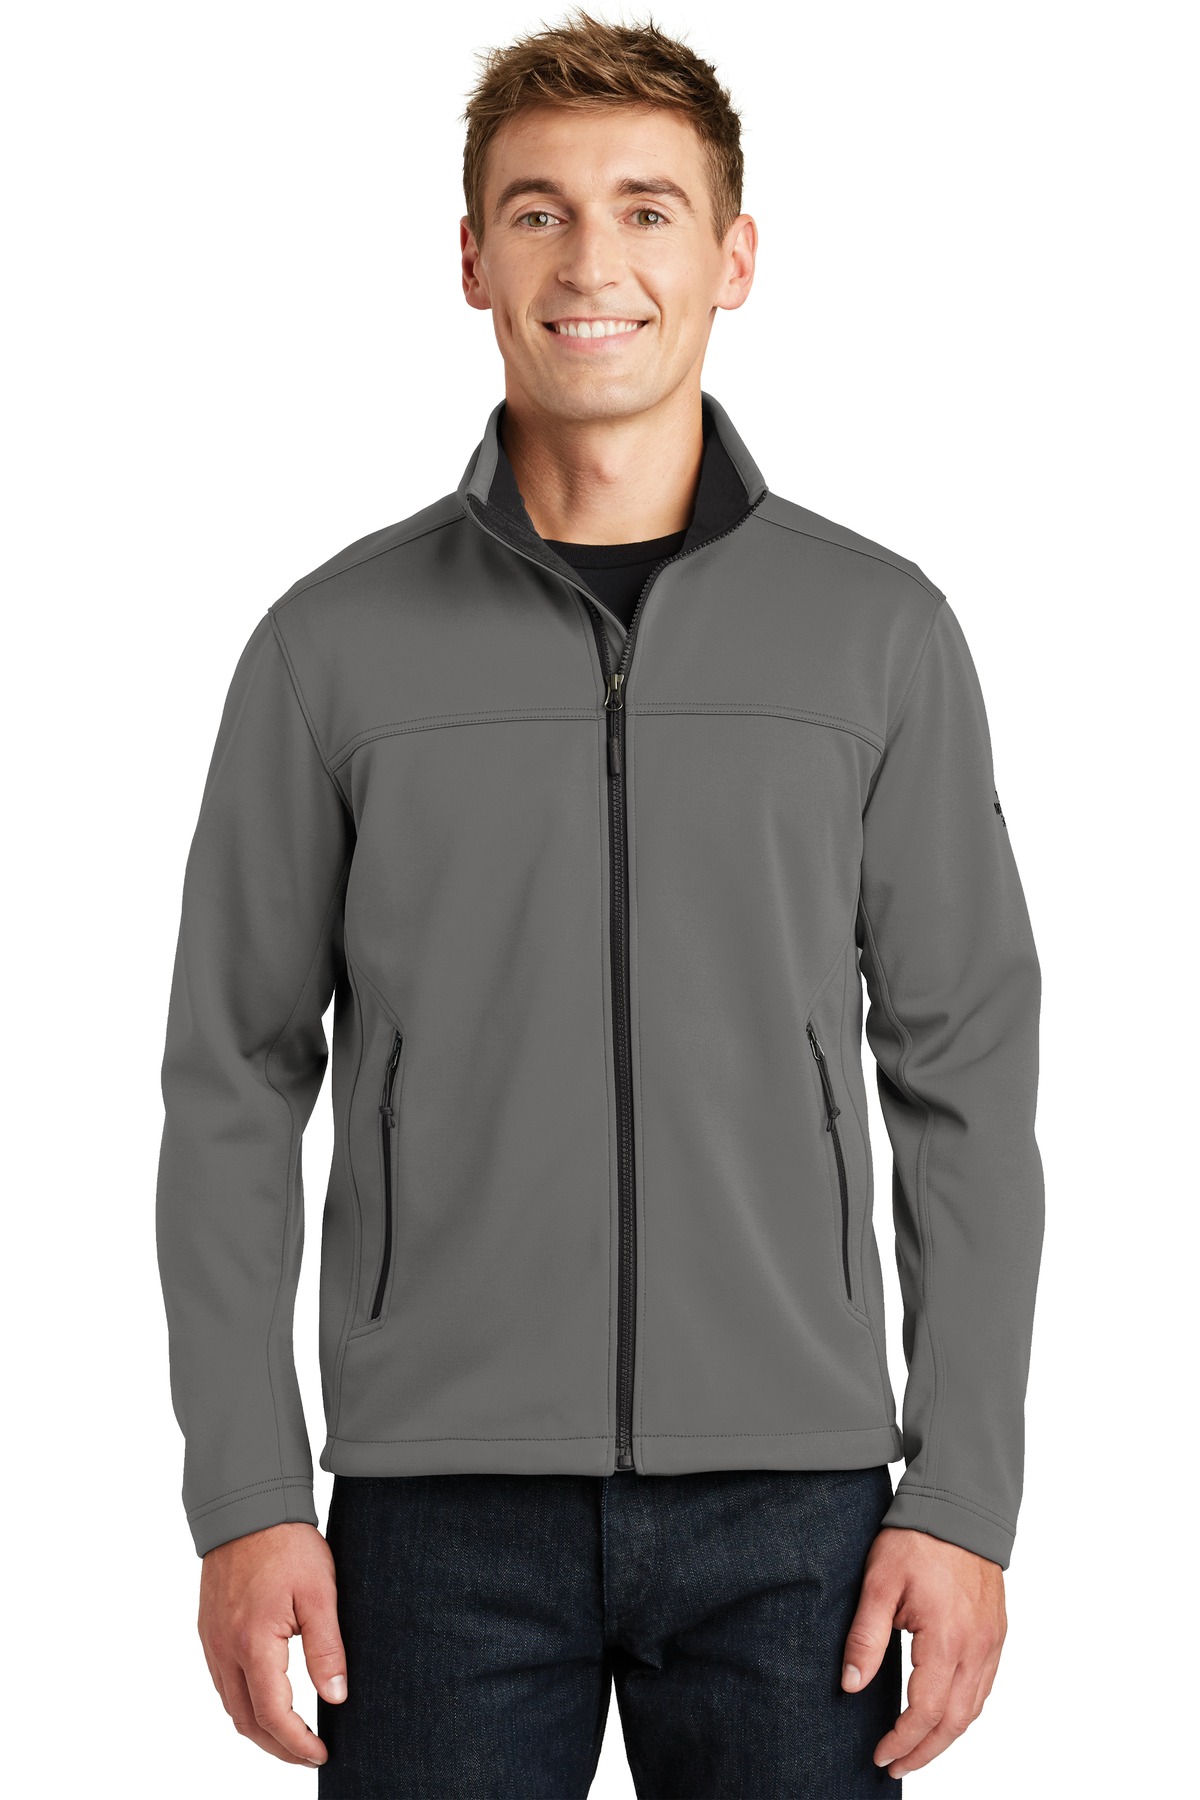 The North Face ® Ridgeline Soft Shell Jacket. NF0A3LGX